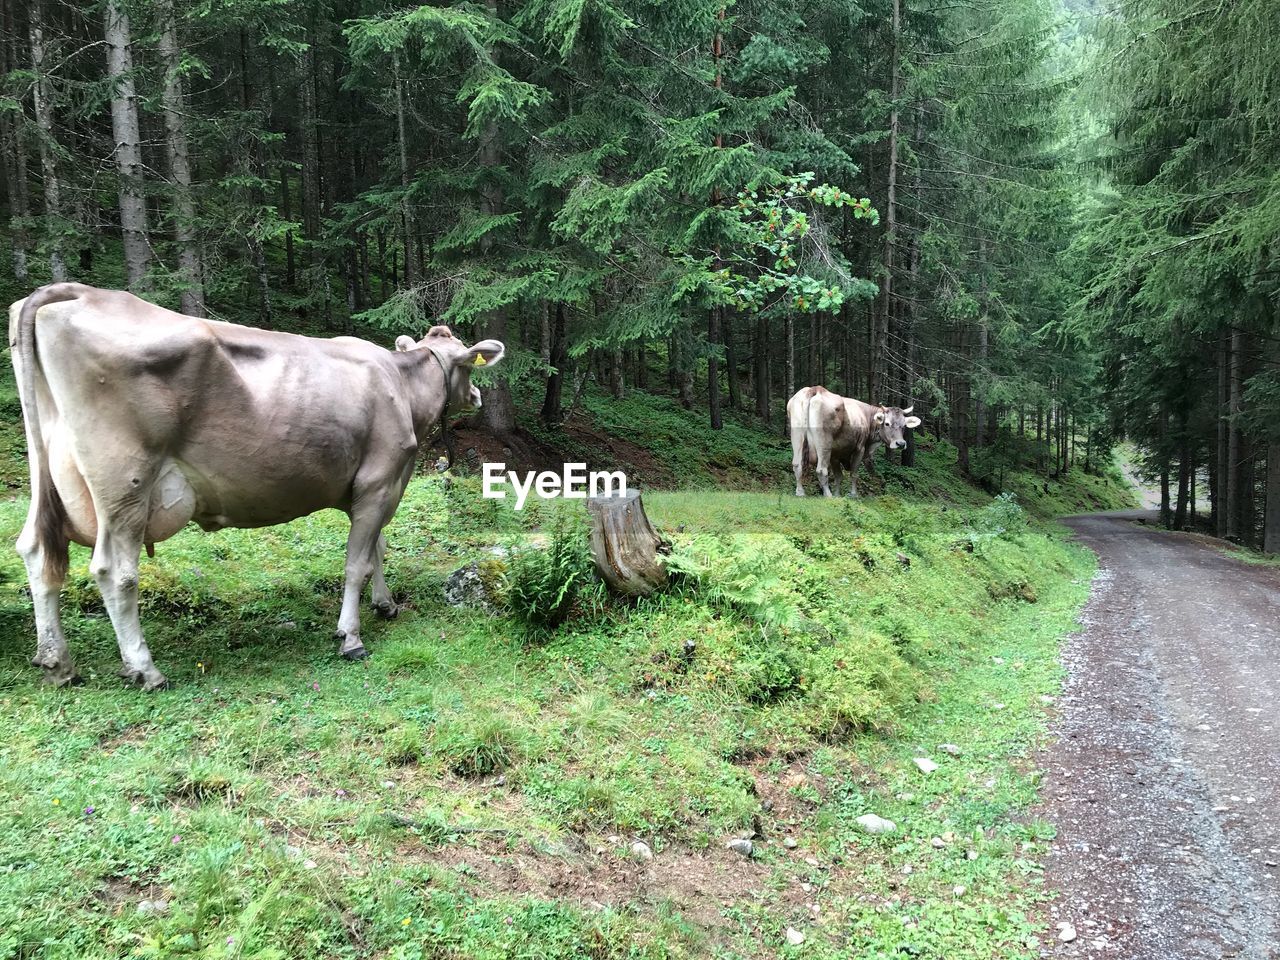 Cows standing in mountain woods